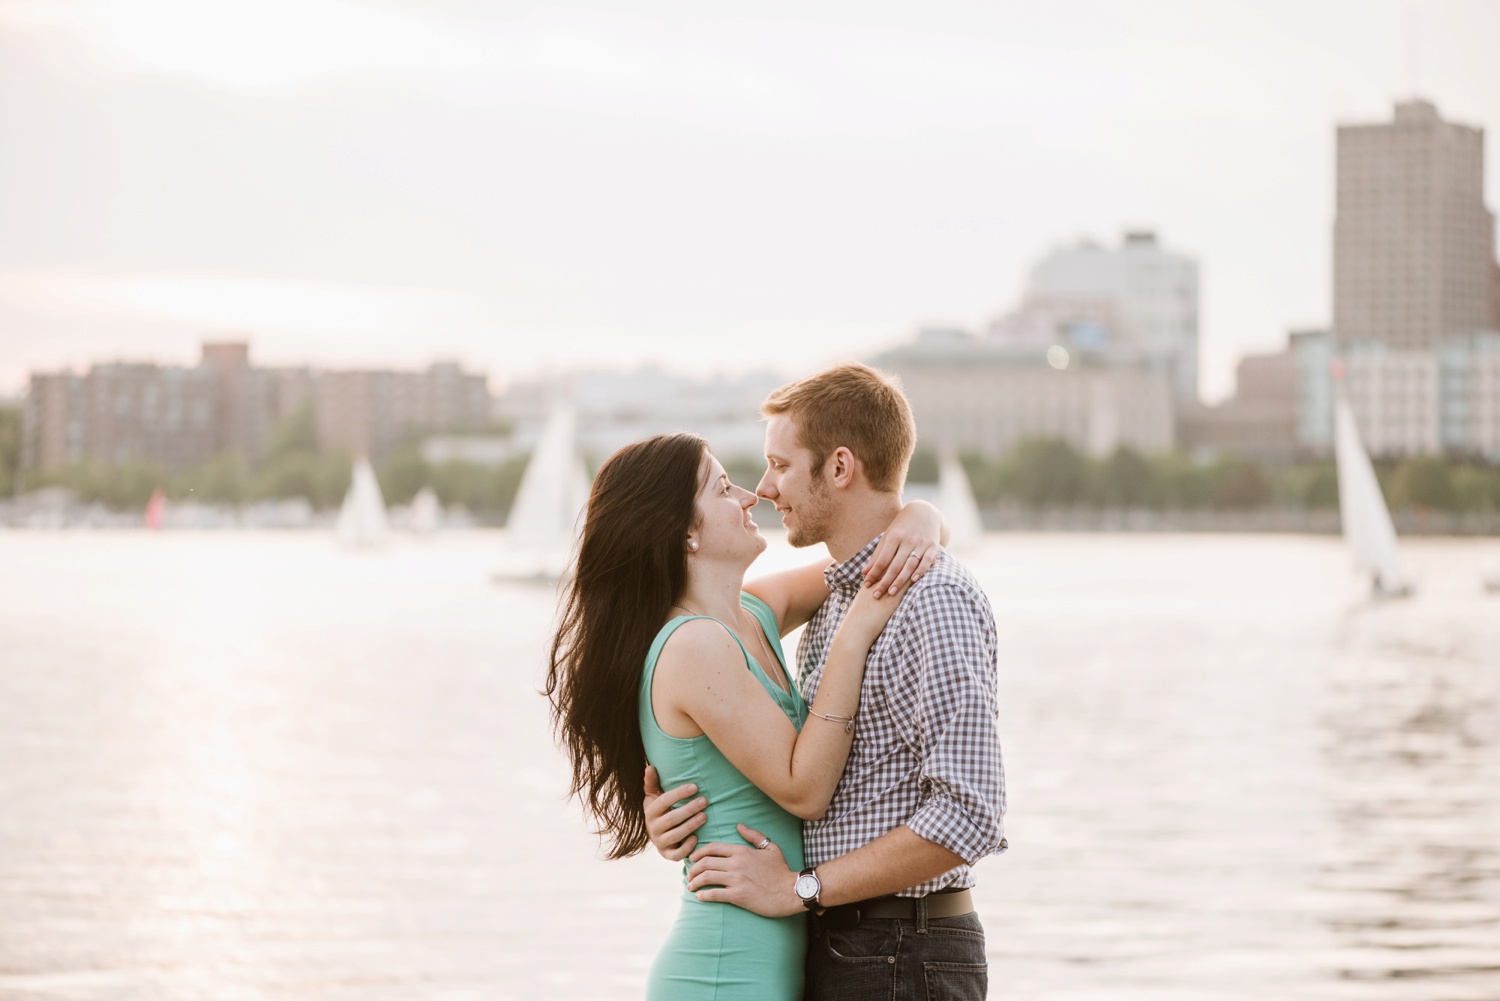 A Book Store & Charles River Esplanade Engagement Session by Boston Fine Art Wedding Photographer Annmarie Swift